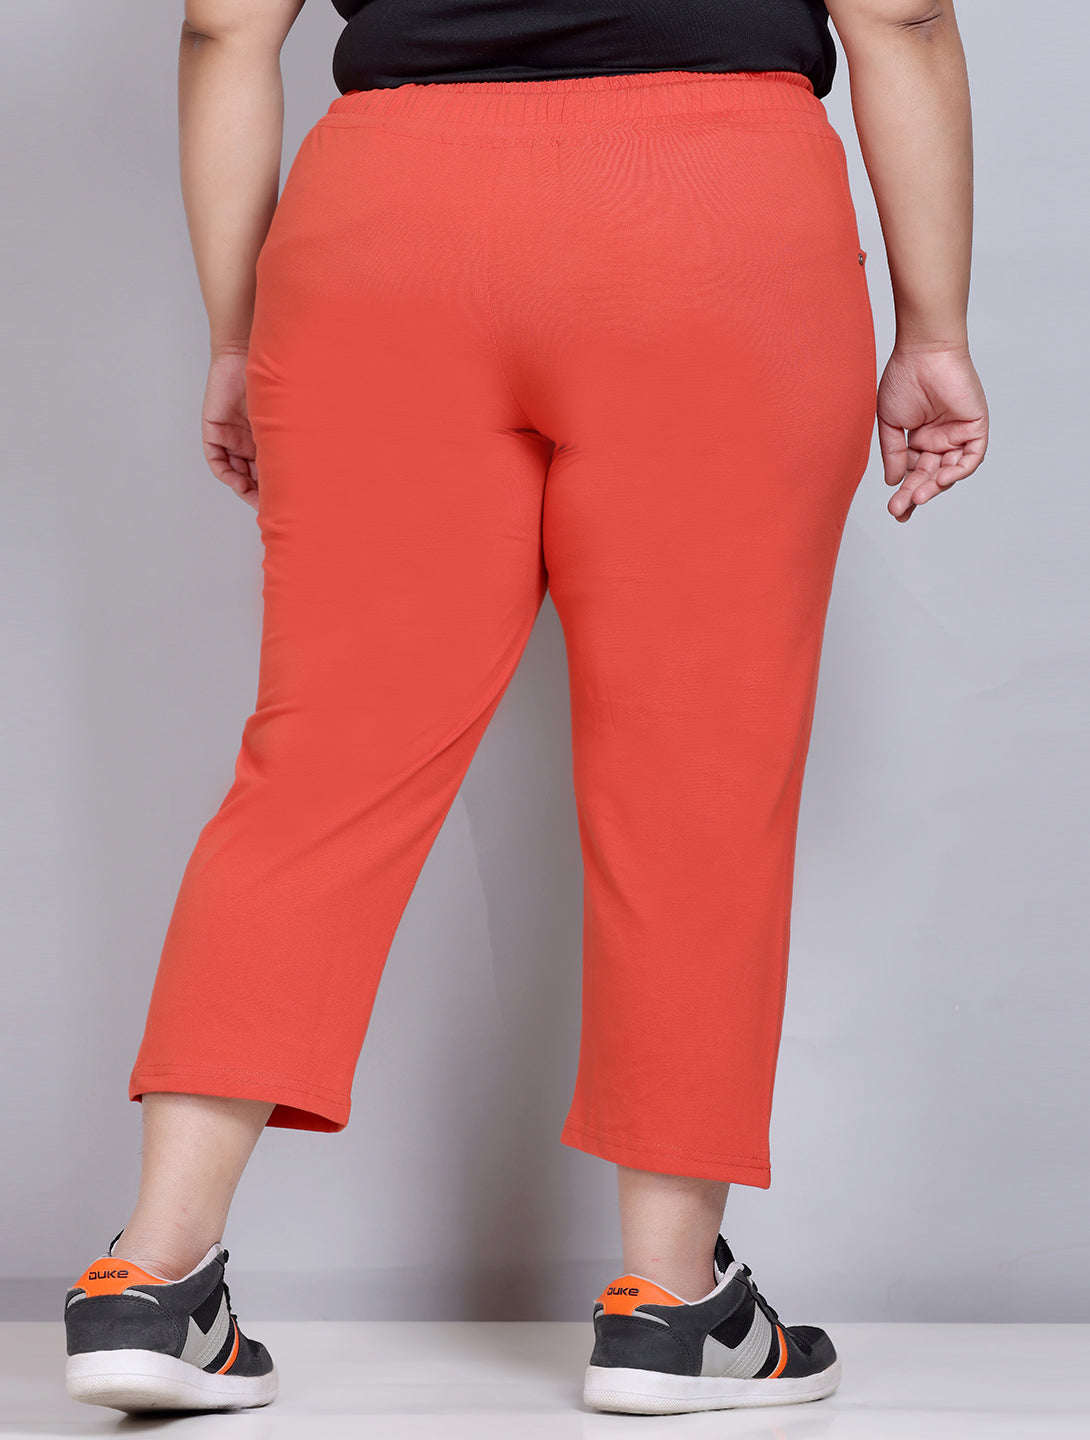 Buy Comfy Orange Half Cotton Capri Pants For Women Online In India By  Cupidclothing's – Cupid Clothings